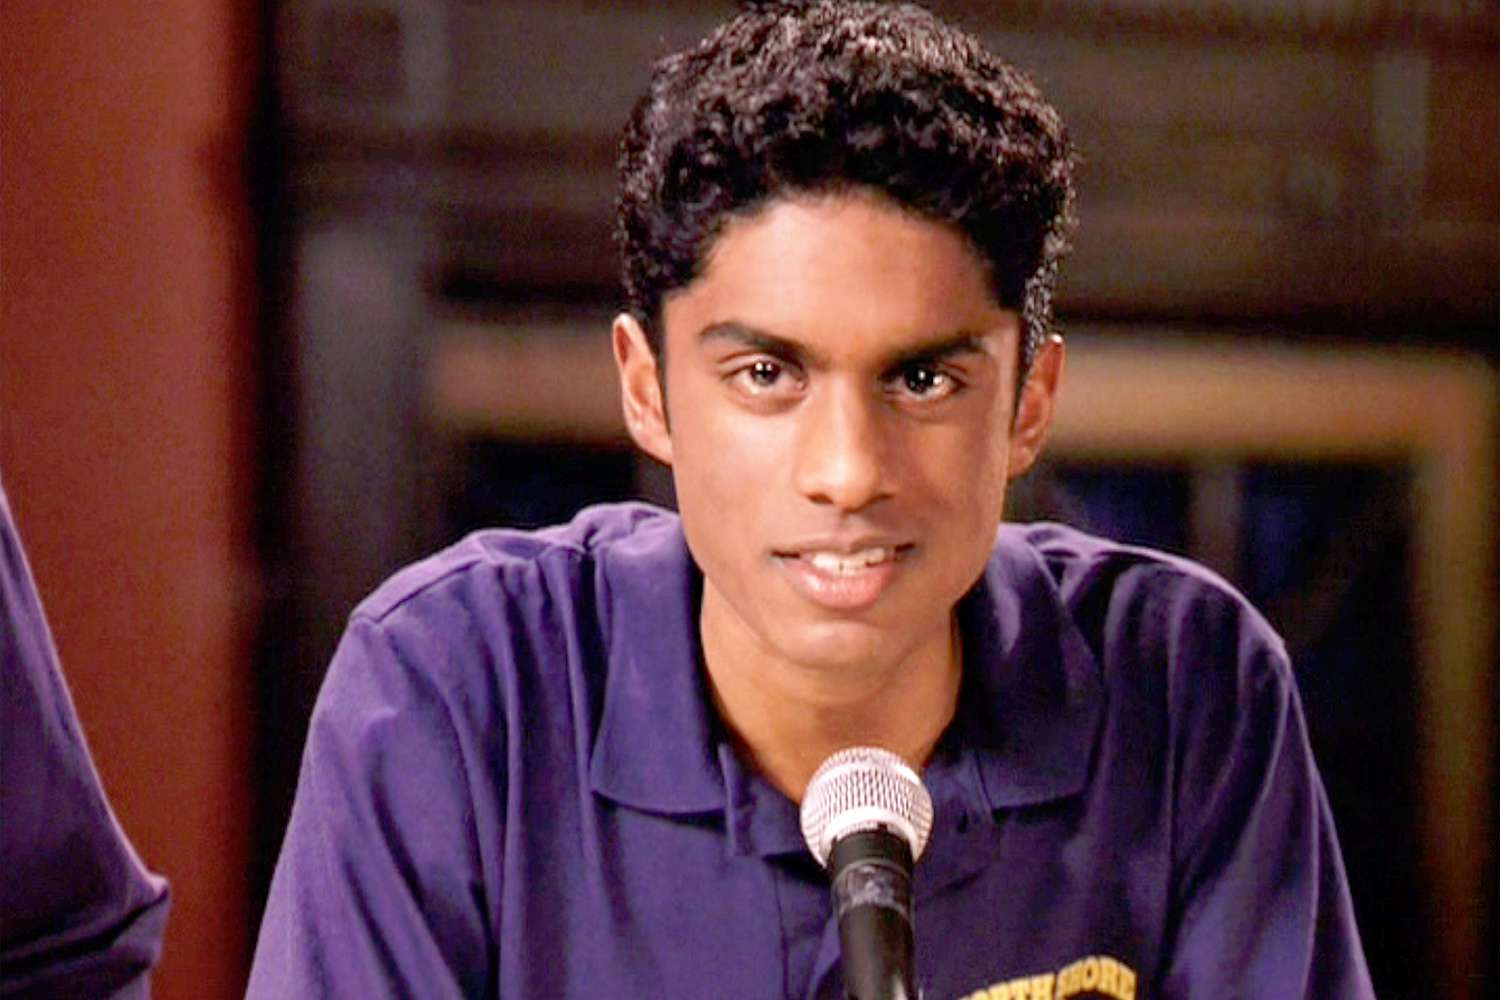 Seen here at the Illinois High School Mathletes State Championship, Rajiv Surendra as Kevin Gnapoor,